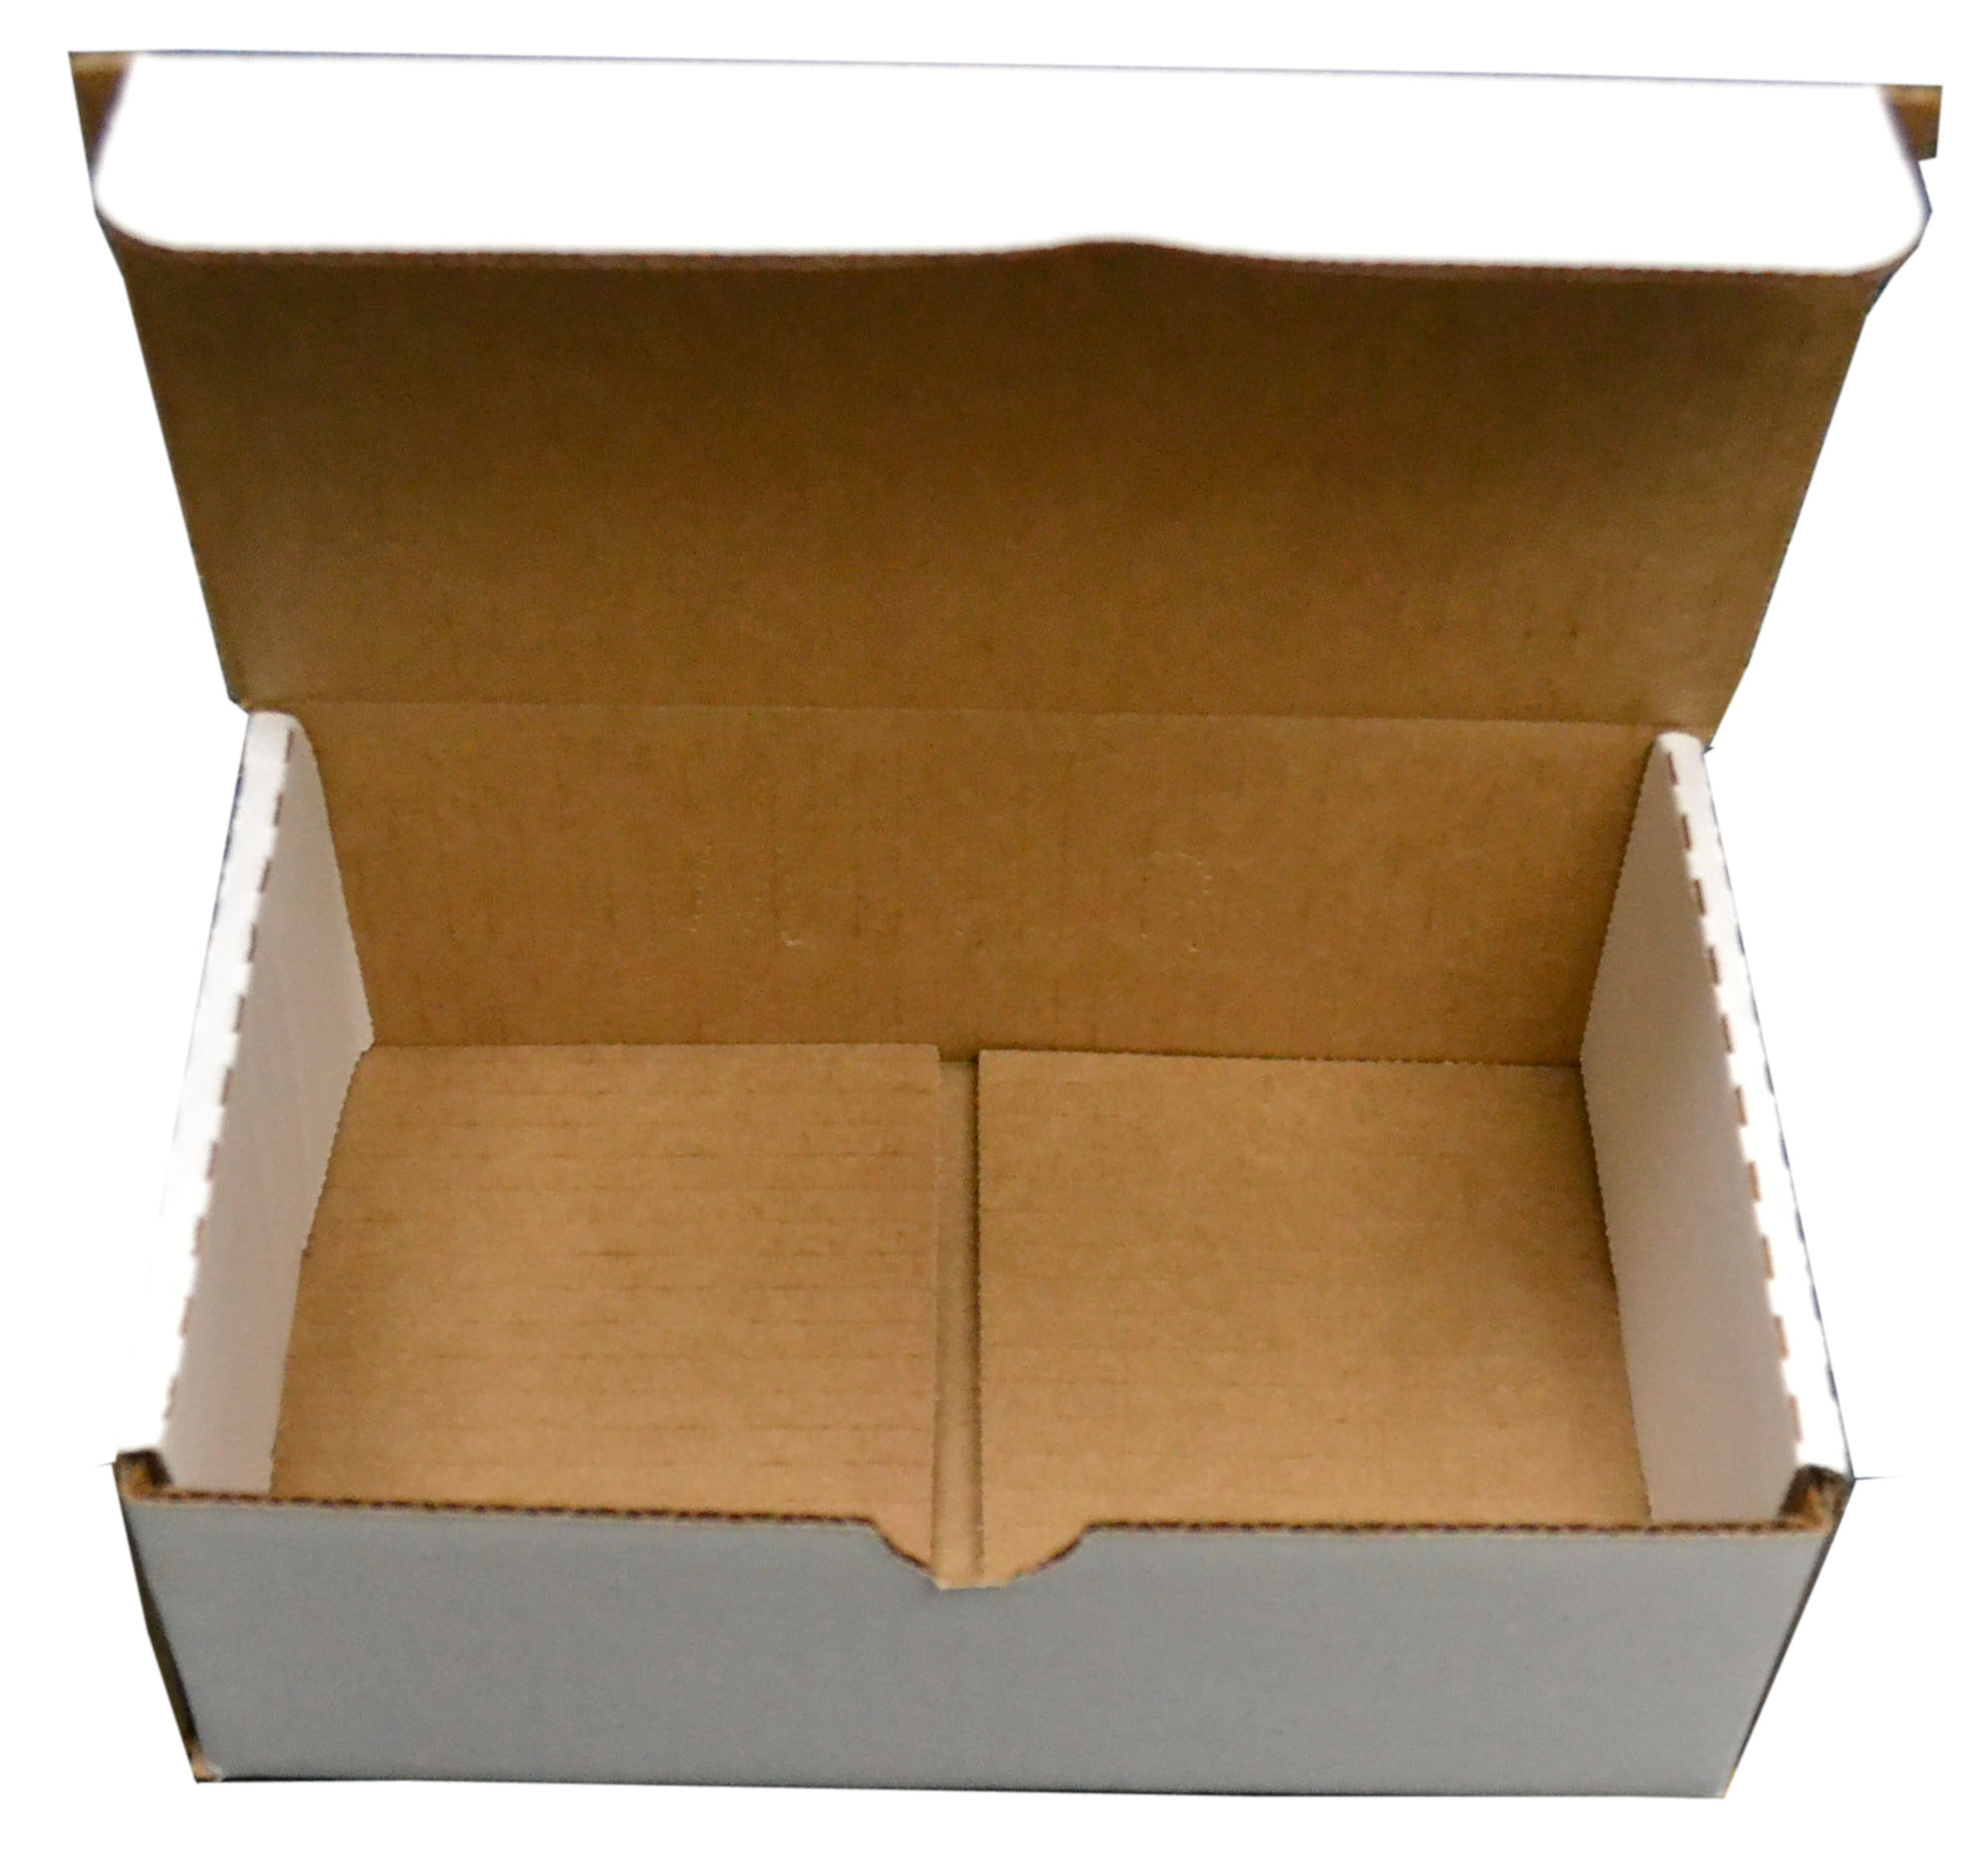 Miller Supply Inc. | Shipping Boxes | Miller Supply Inc.